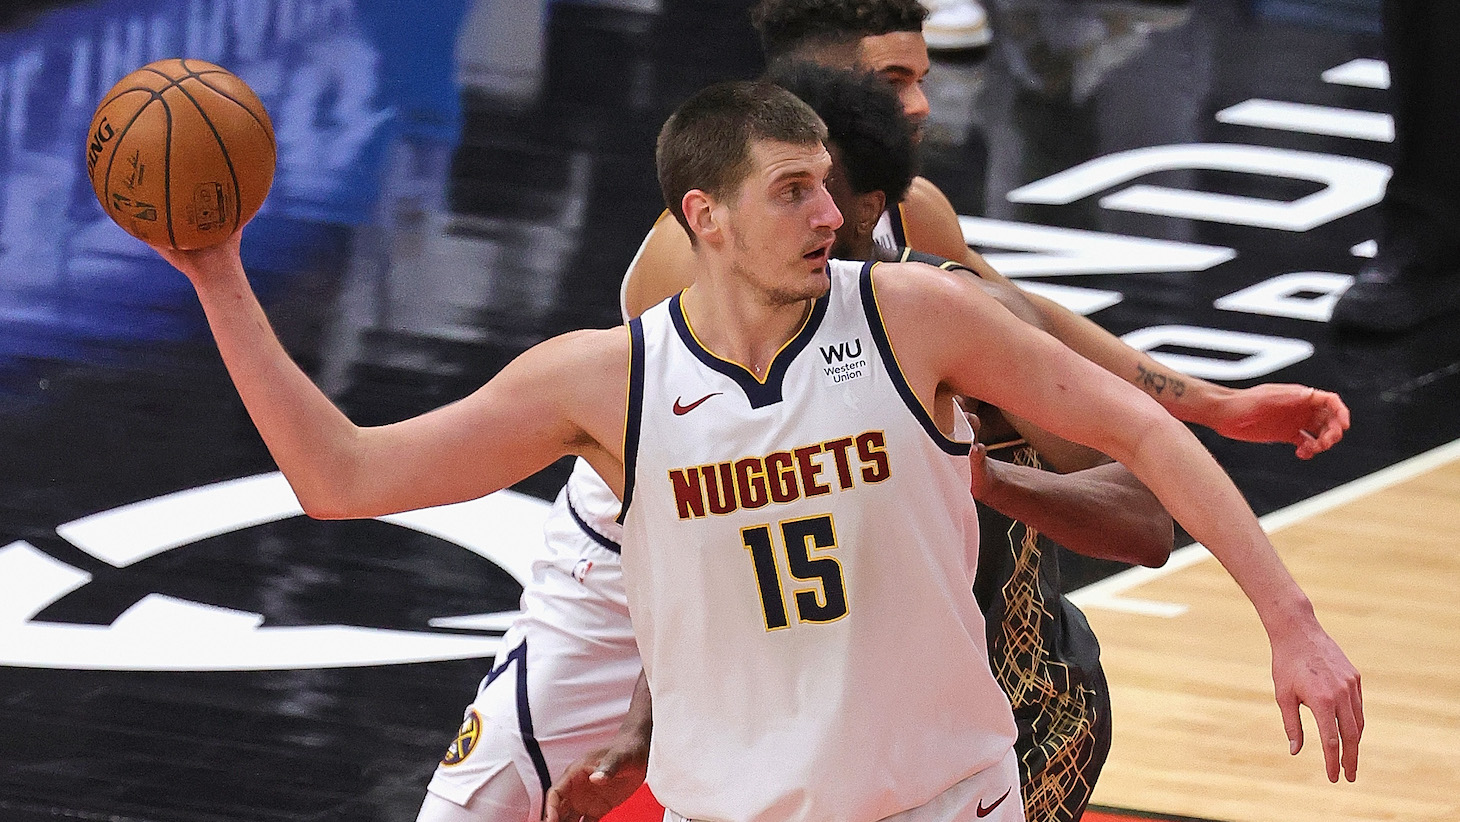 CHICAGO, ILLINOIS - MARCH 01: Nikola Jokic #15 of the Denver Nuggets passes downcourt against the Chicago Bulls at the United Center on March 01, 2021 in Chicago, Illinois. NOTE TO USER: User expressly acknowledges and agrees that, by downloading and or using this photograph, User is consenting to the terms and conditions of the Getty Images License Agreement. (Photo by Jonathan Daniel/Getty Images)